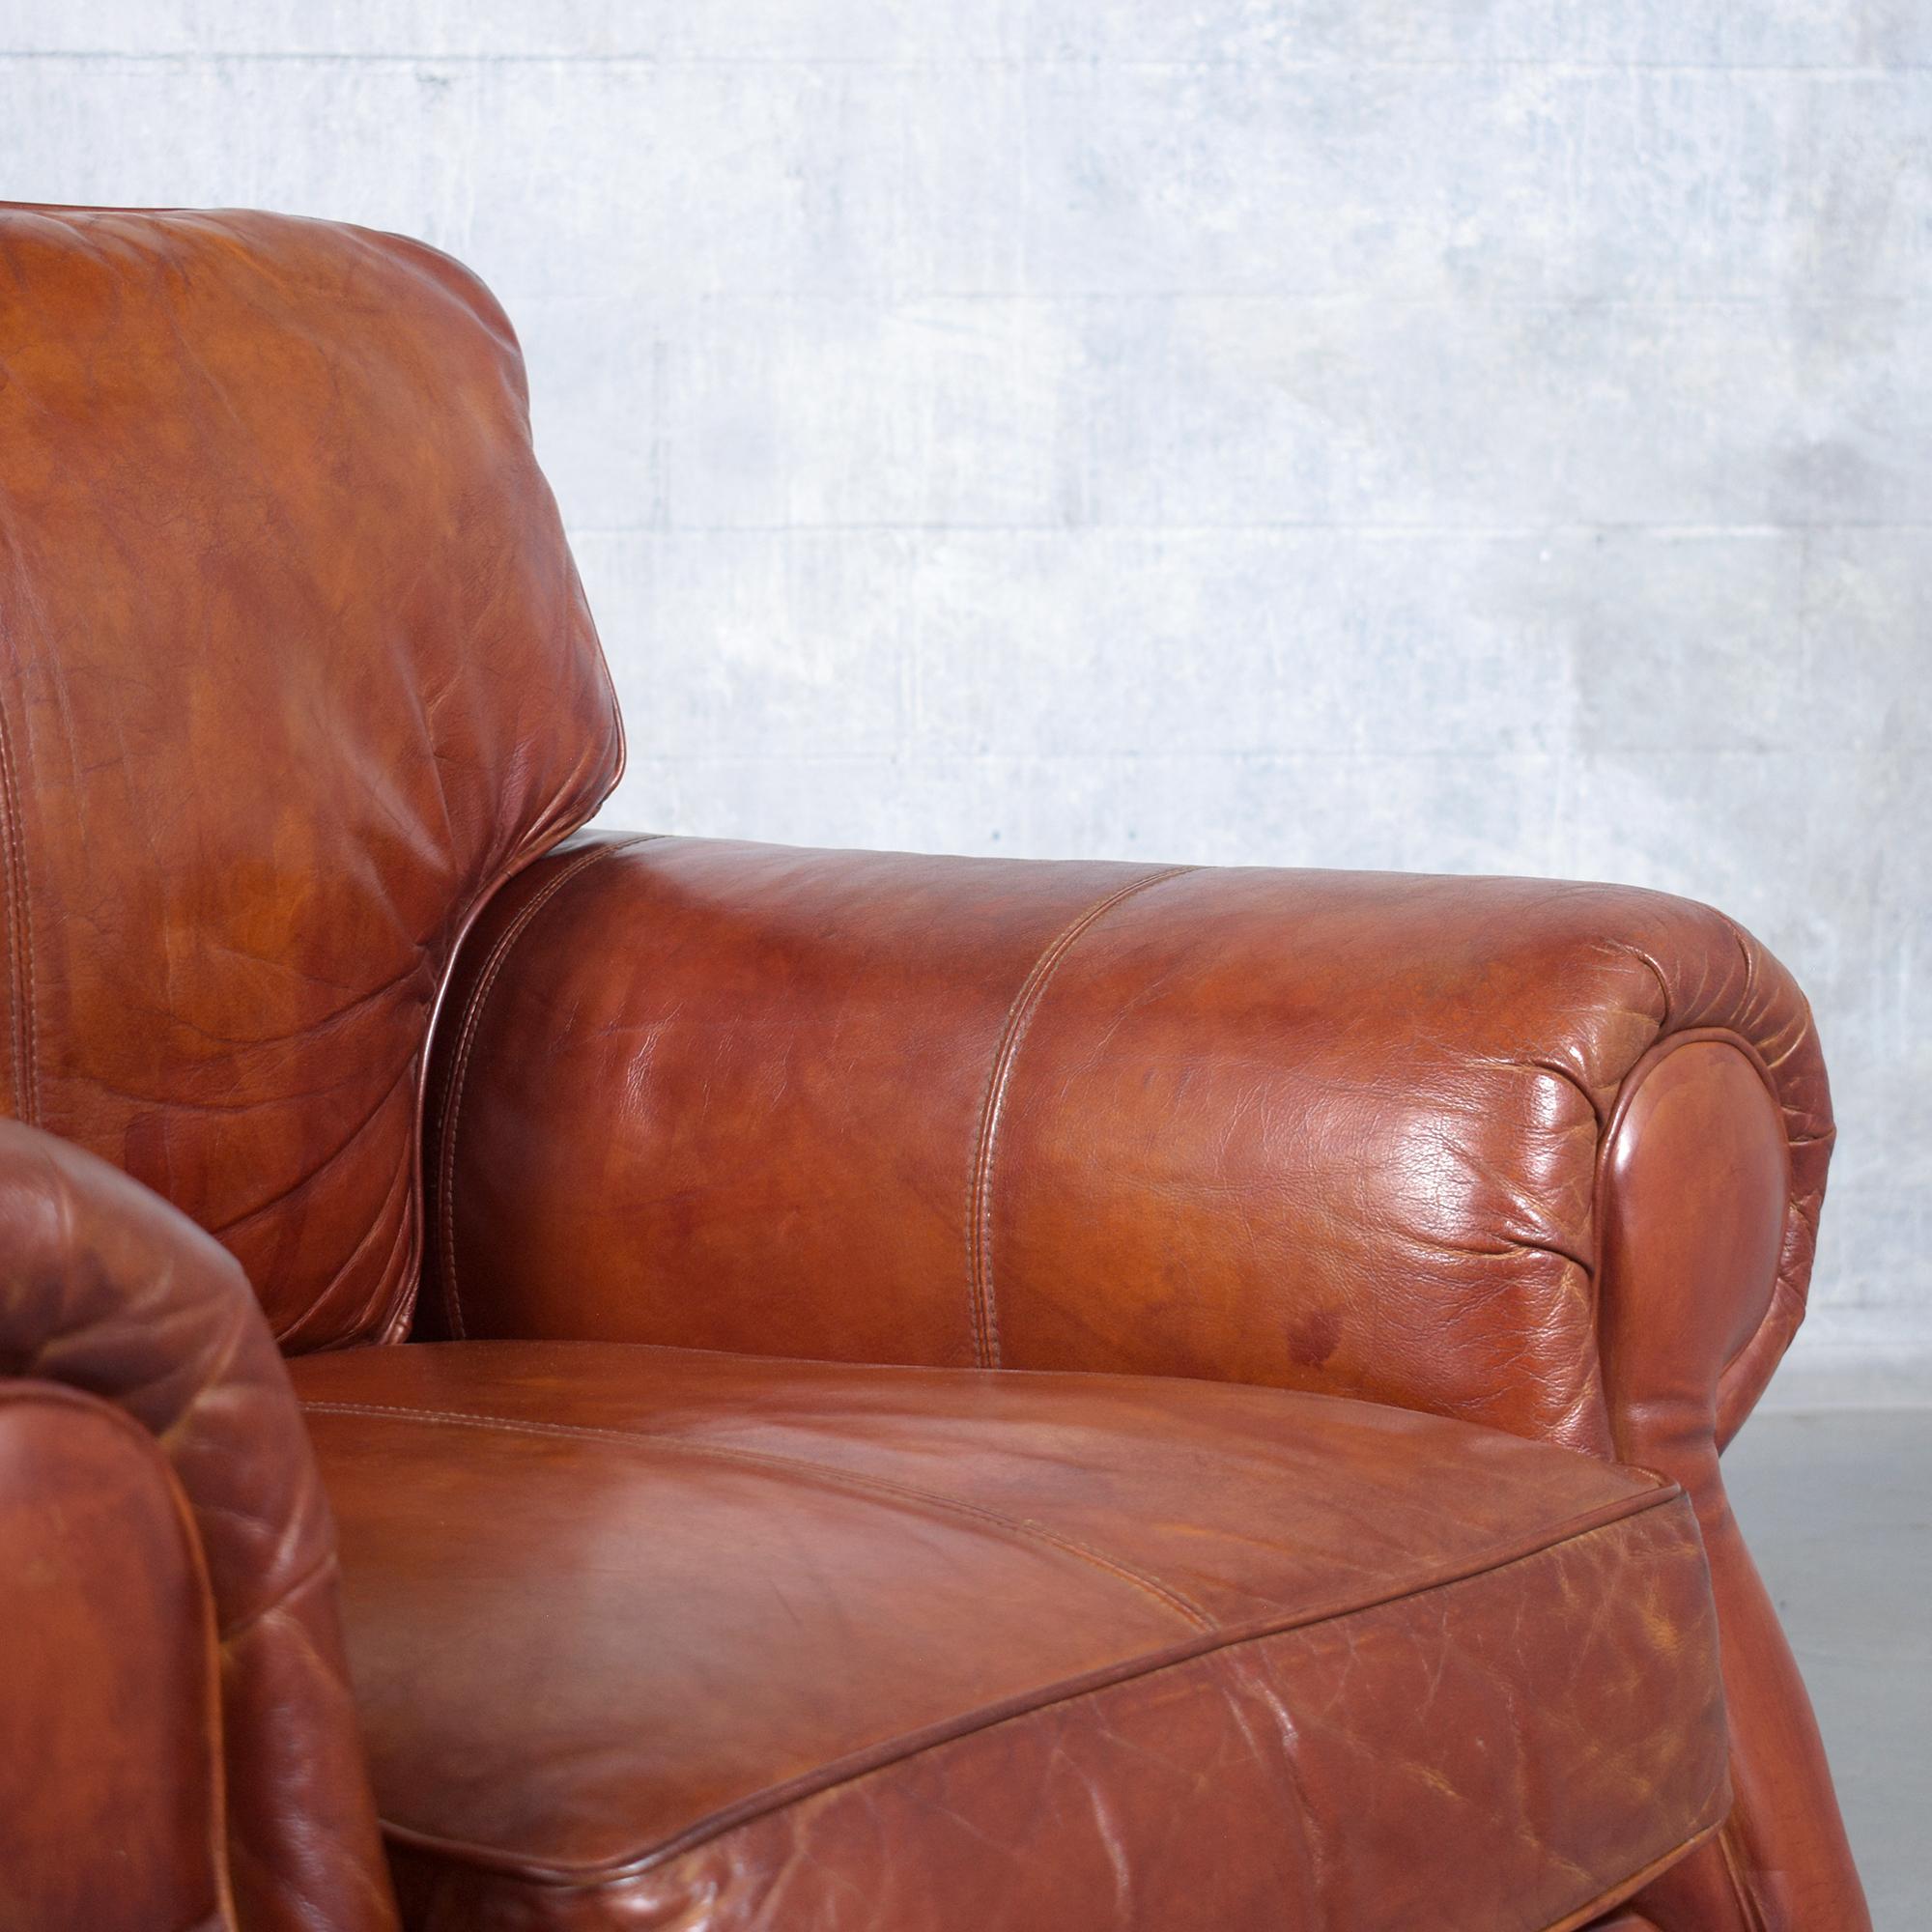 Restored Vintage Leather Armchairs in Cognac Brown with Carved Bun Legs For Sale 4